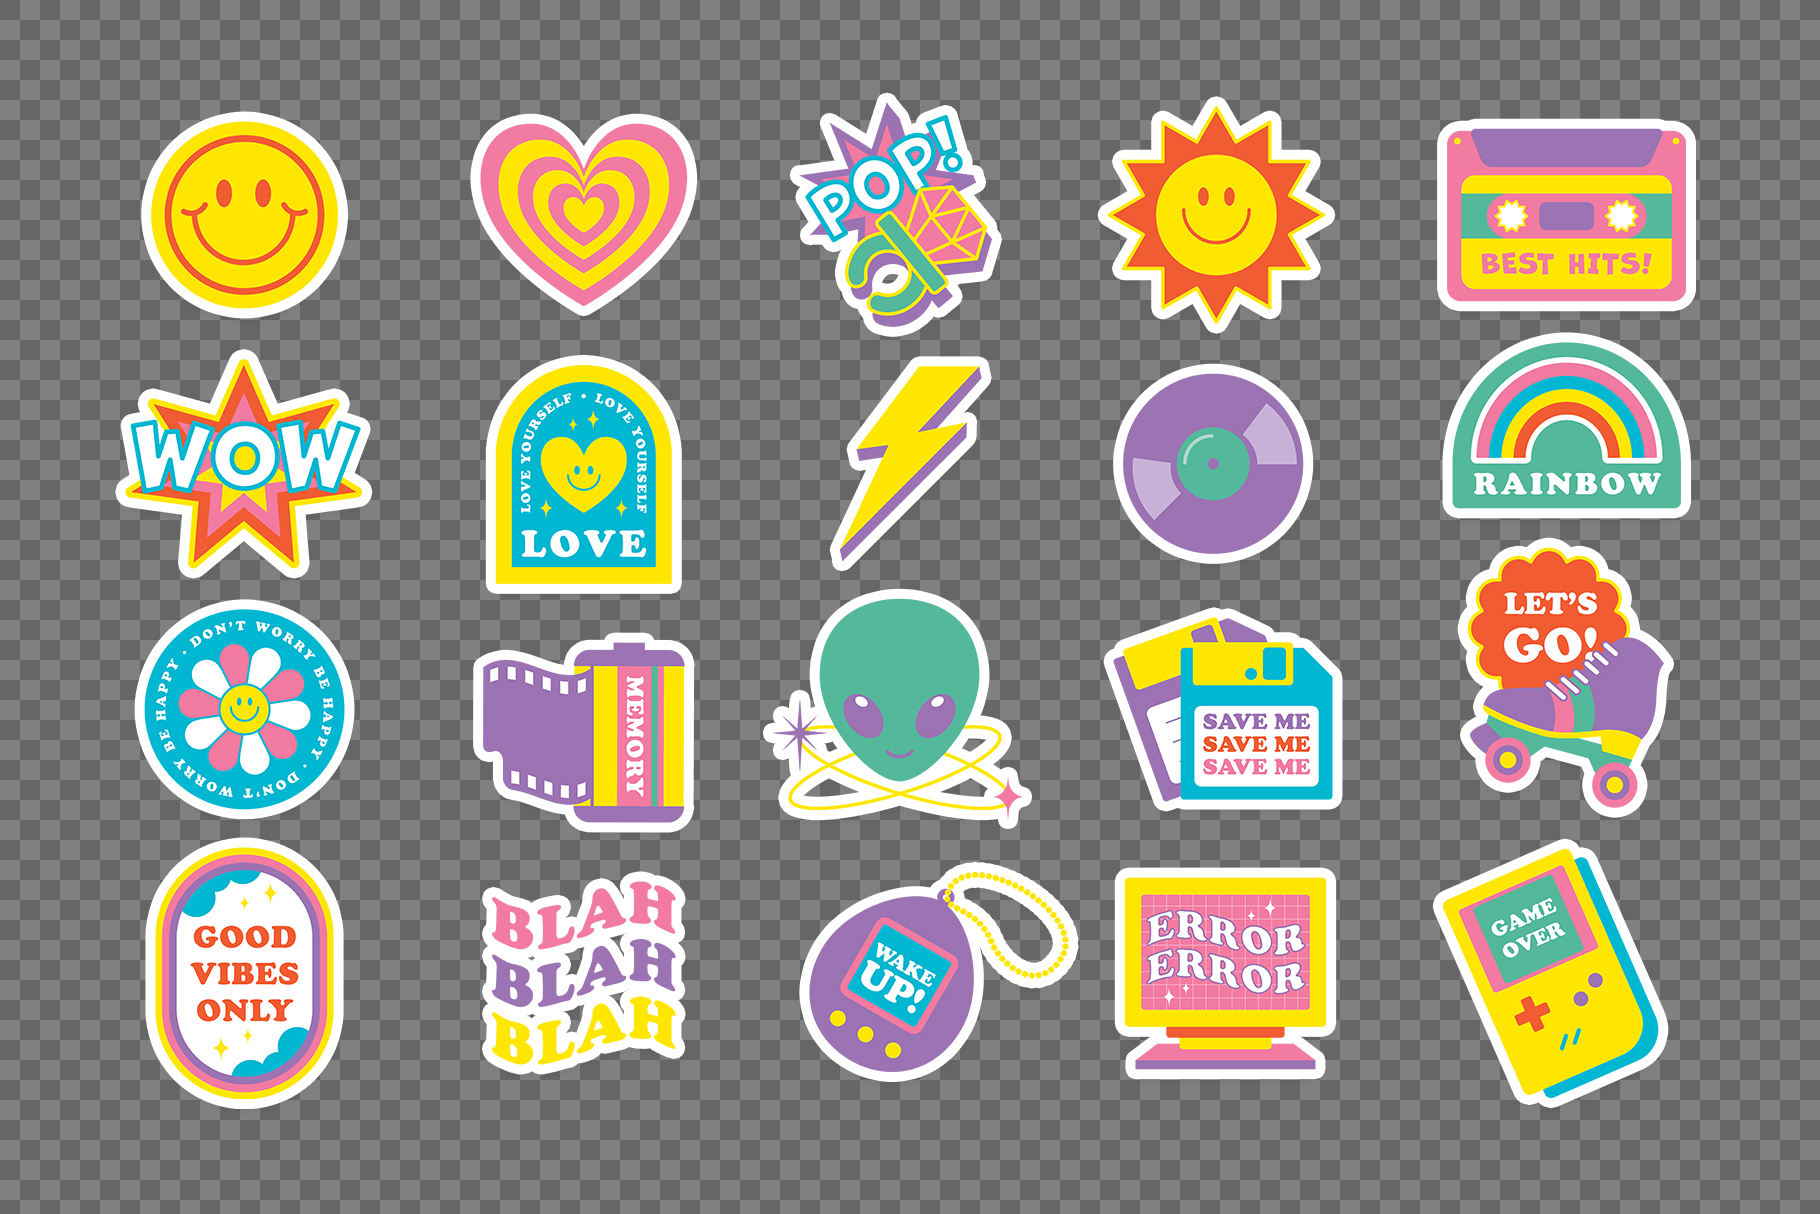 Y2K Illustrations & Stickers (AI, EPS, PNG Format)